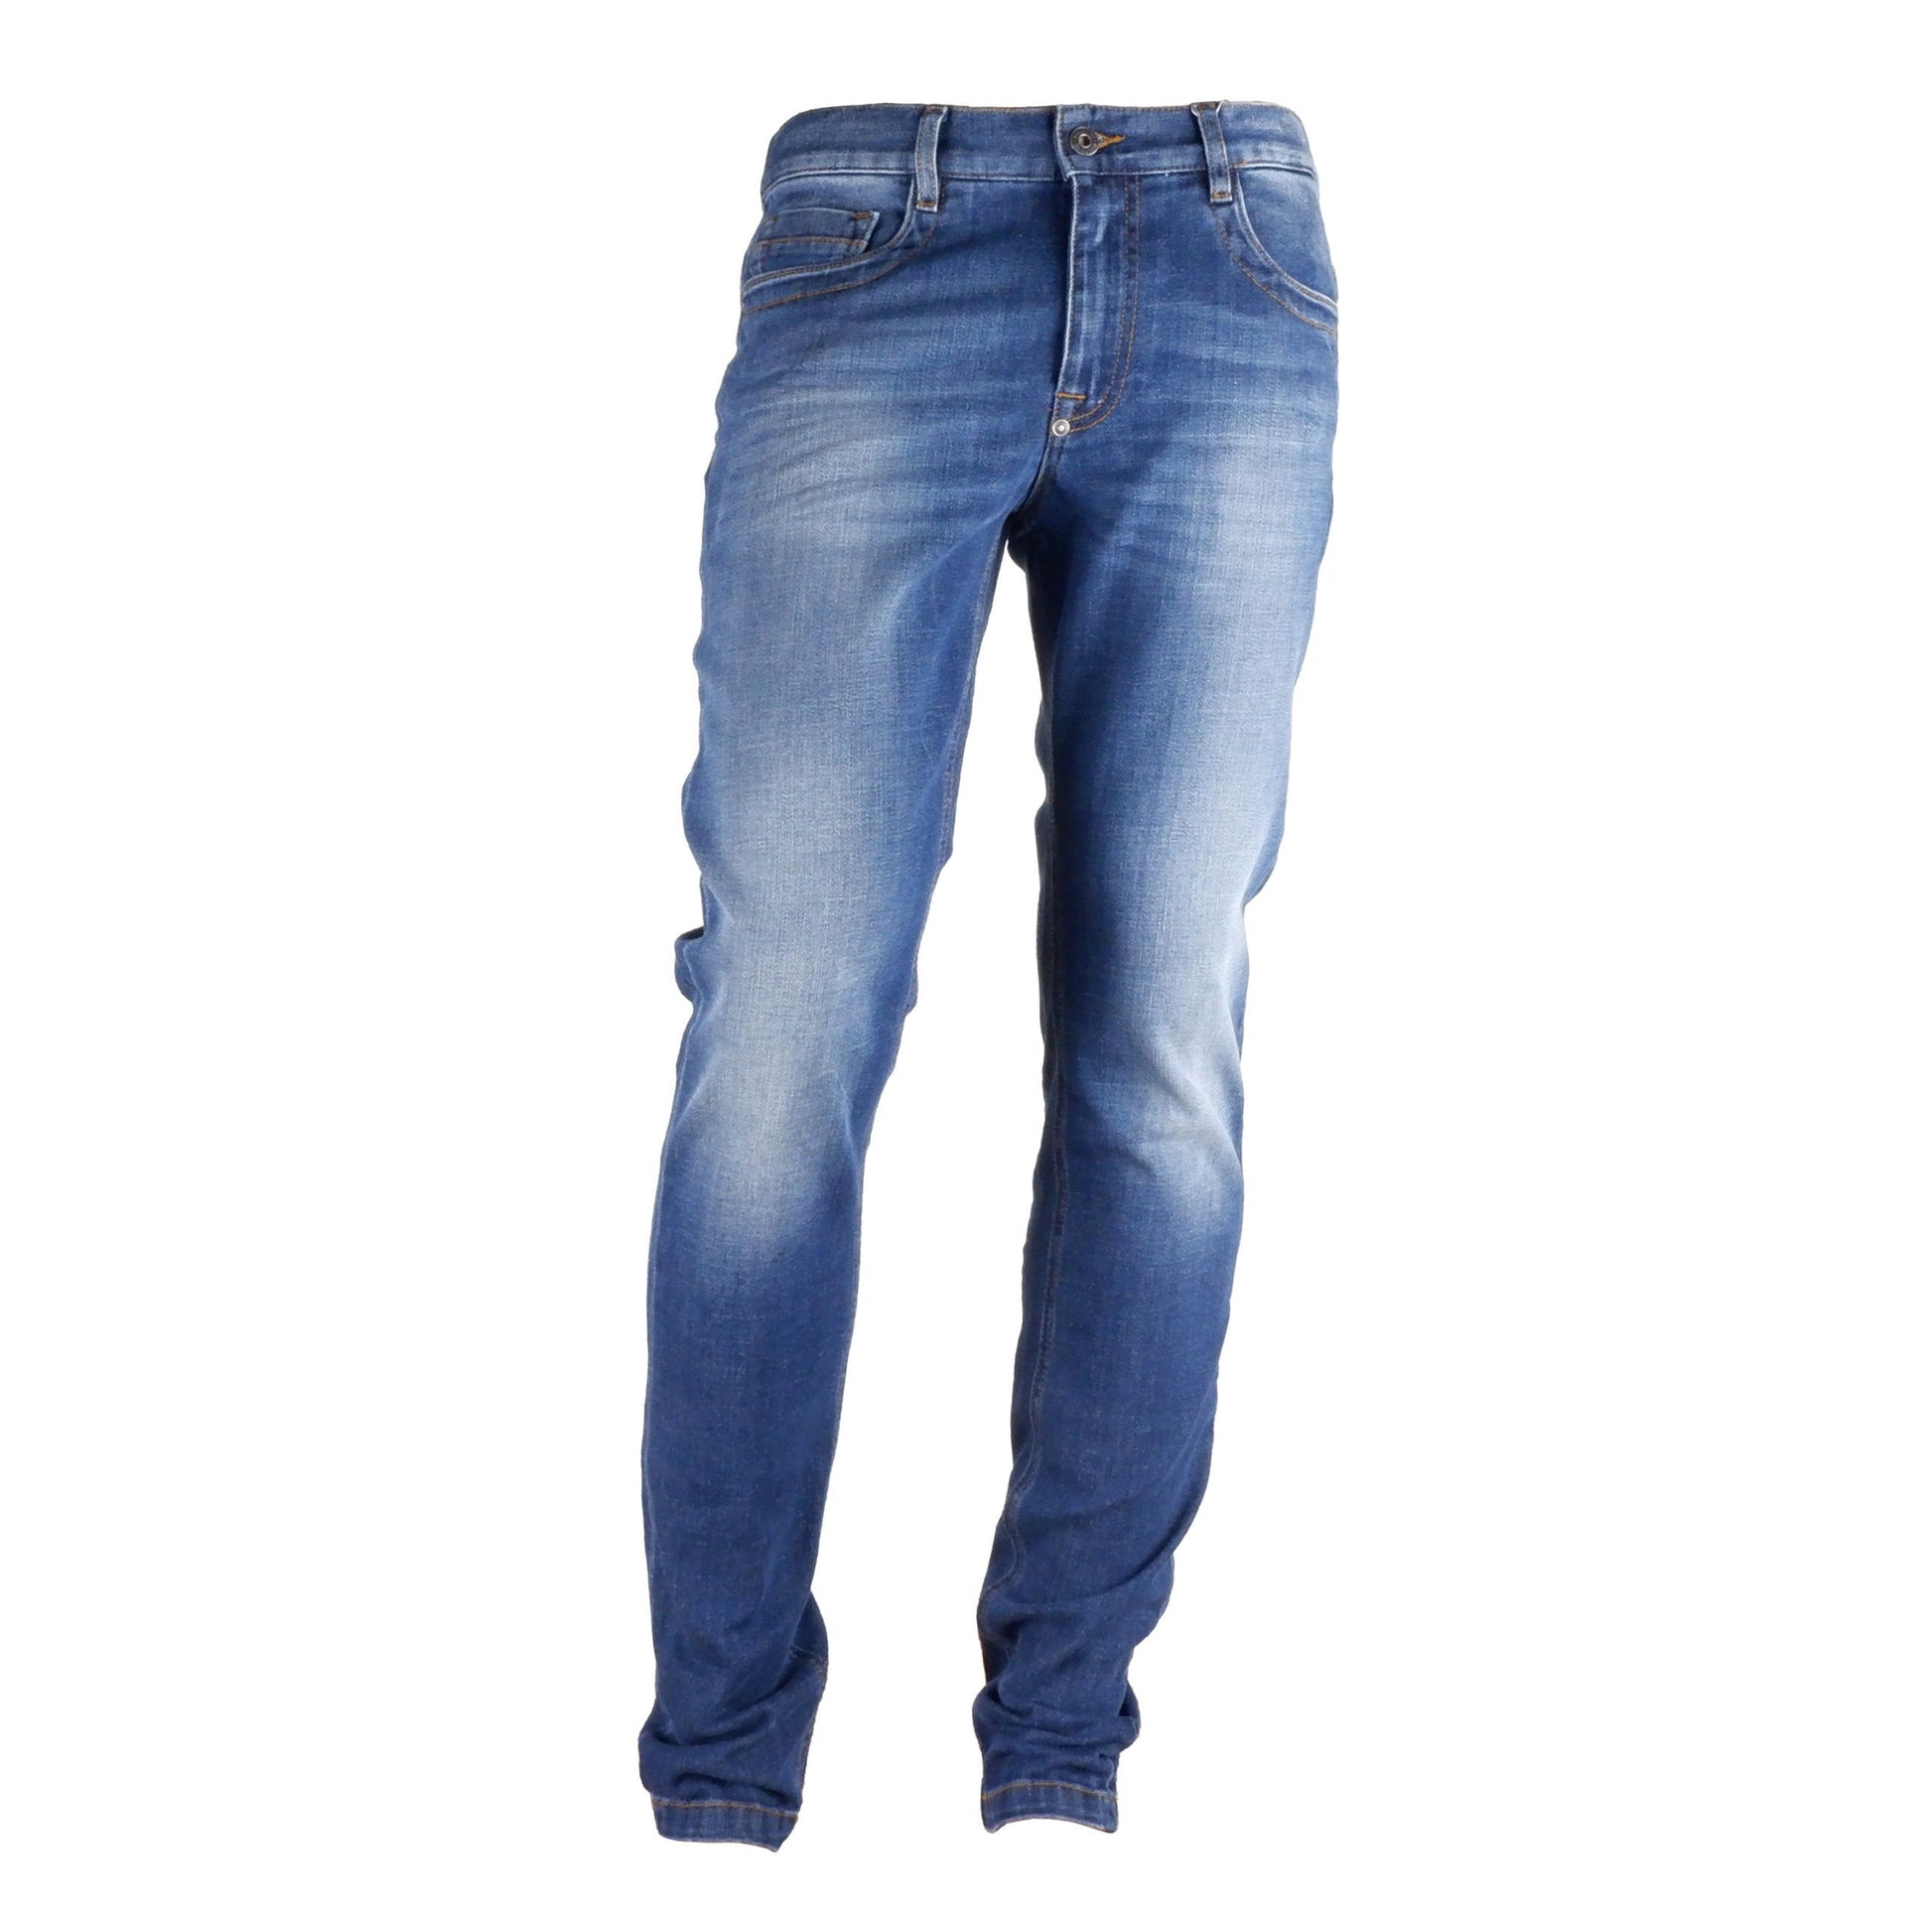 Dark Blue Regular Fit Men's Jeans - Designed by Bikkembergs Available to Buy at a Discounted Price on Moon Behind The Hill Online Designer Discount Store